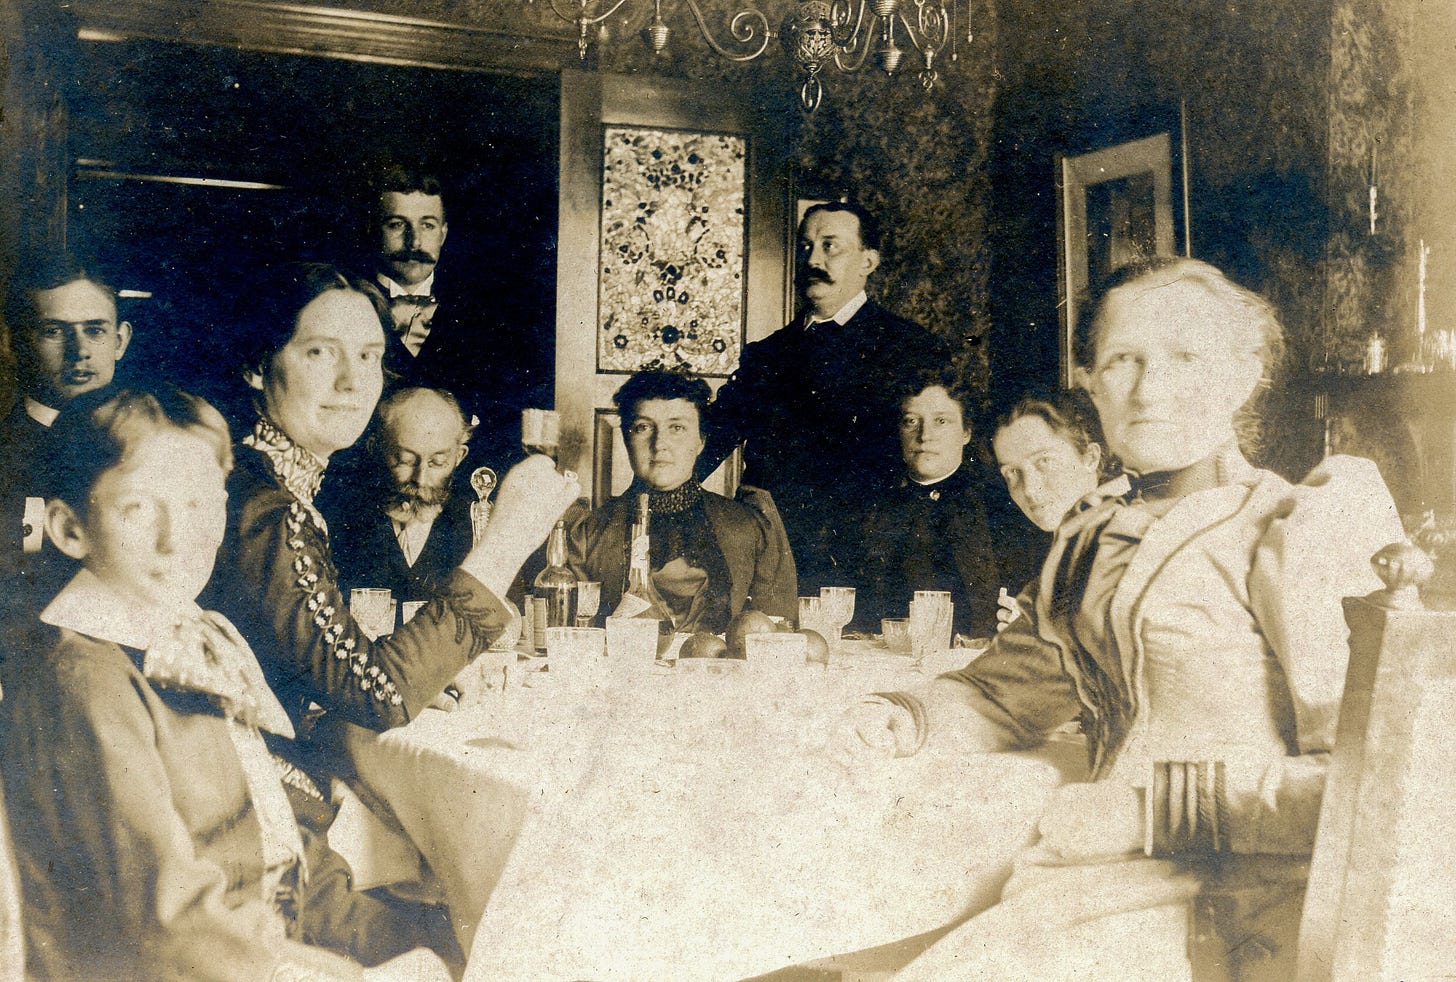 People gathered around a table with drinks